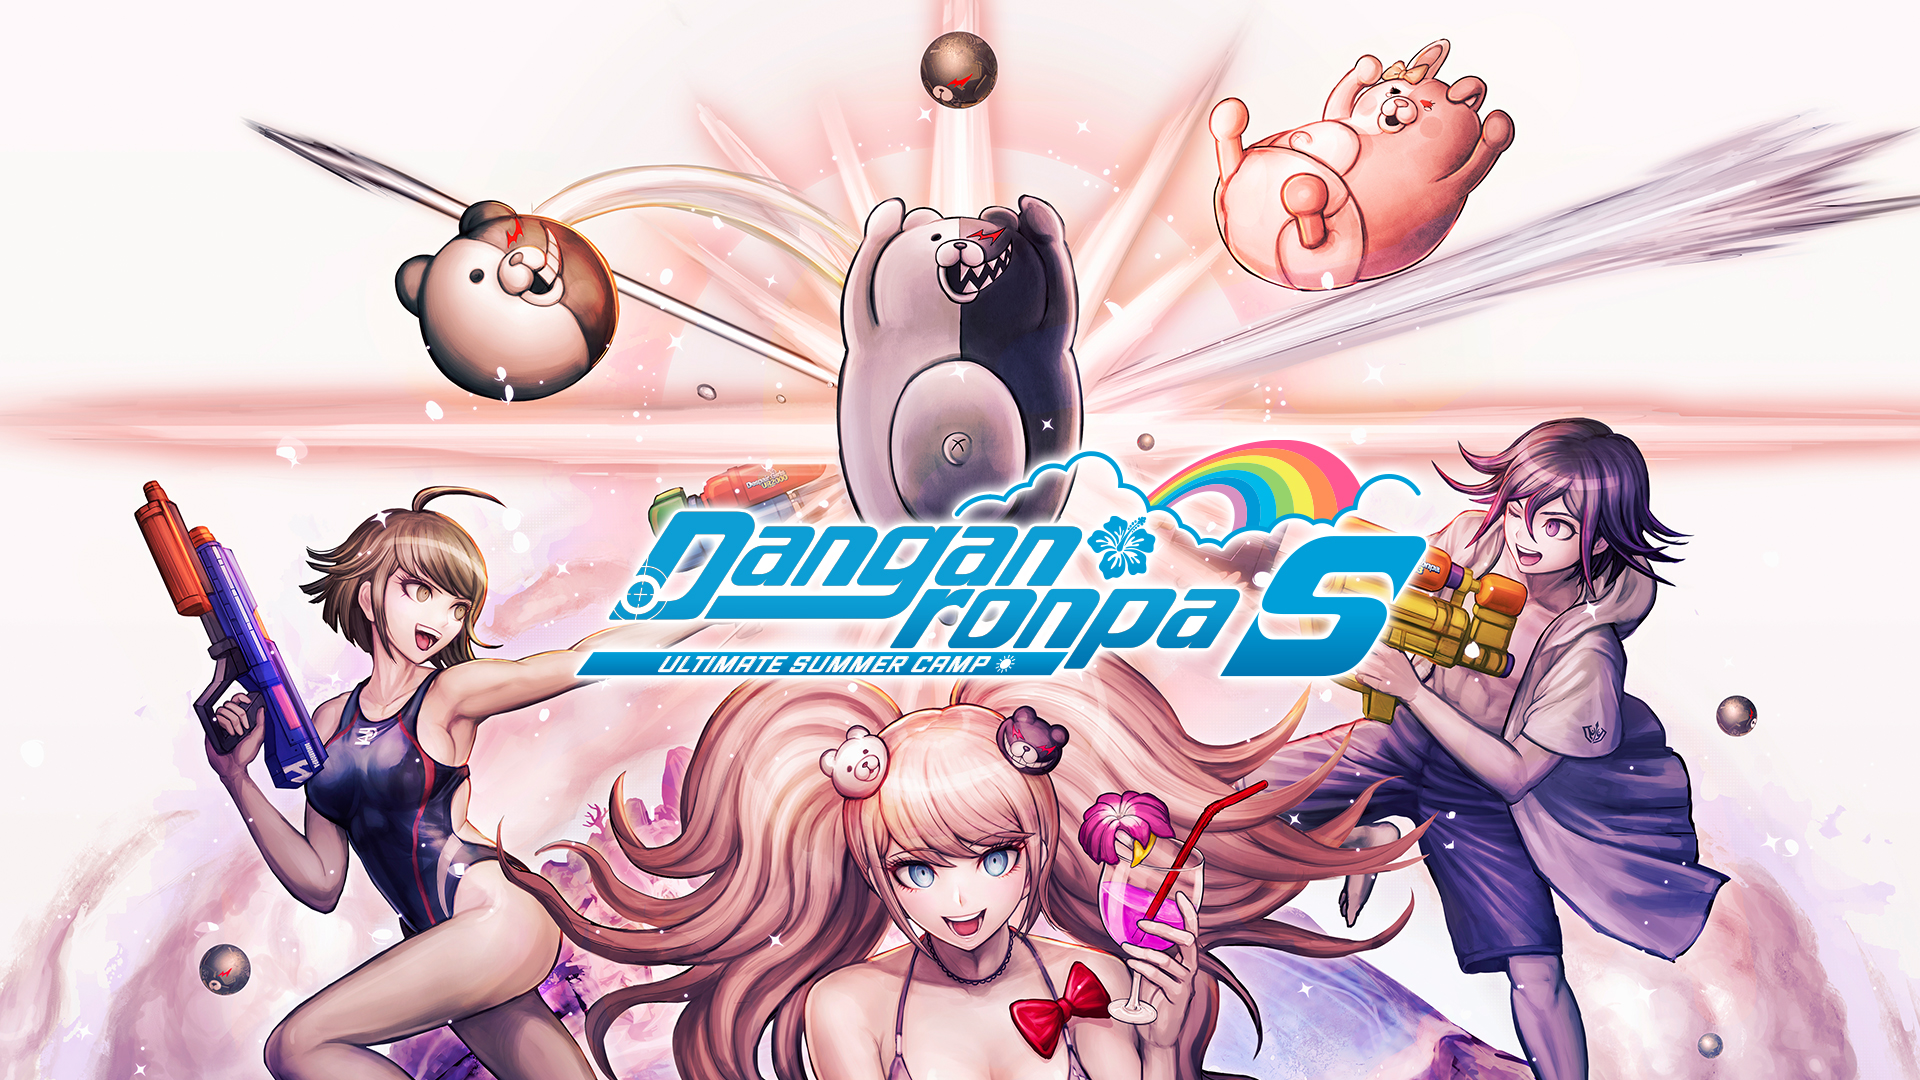 A promotional image for Danganronpa S: Ultimate Summer Camp